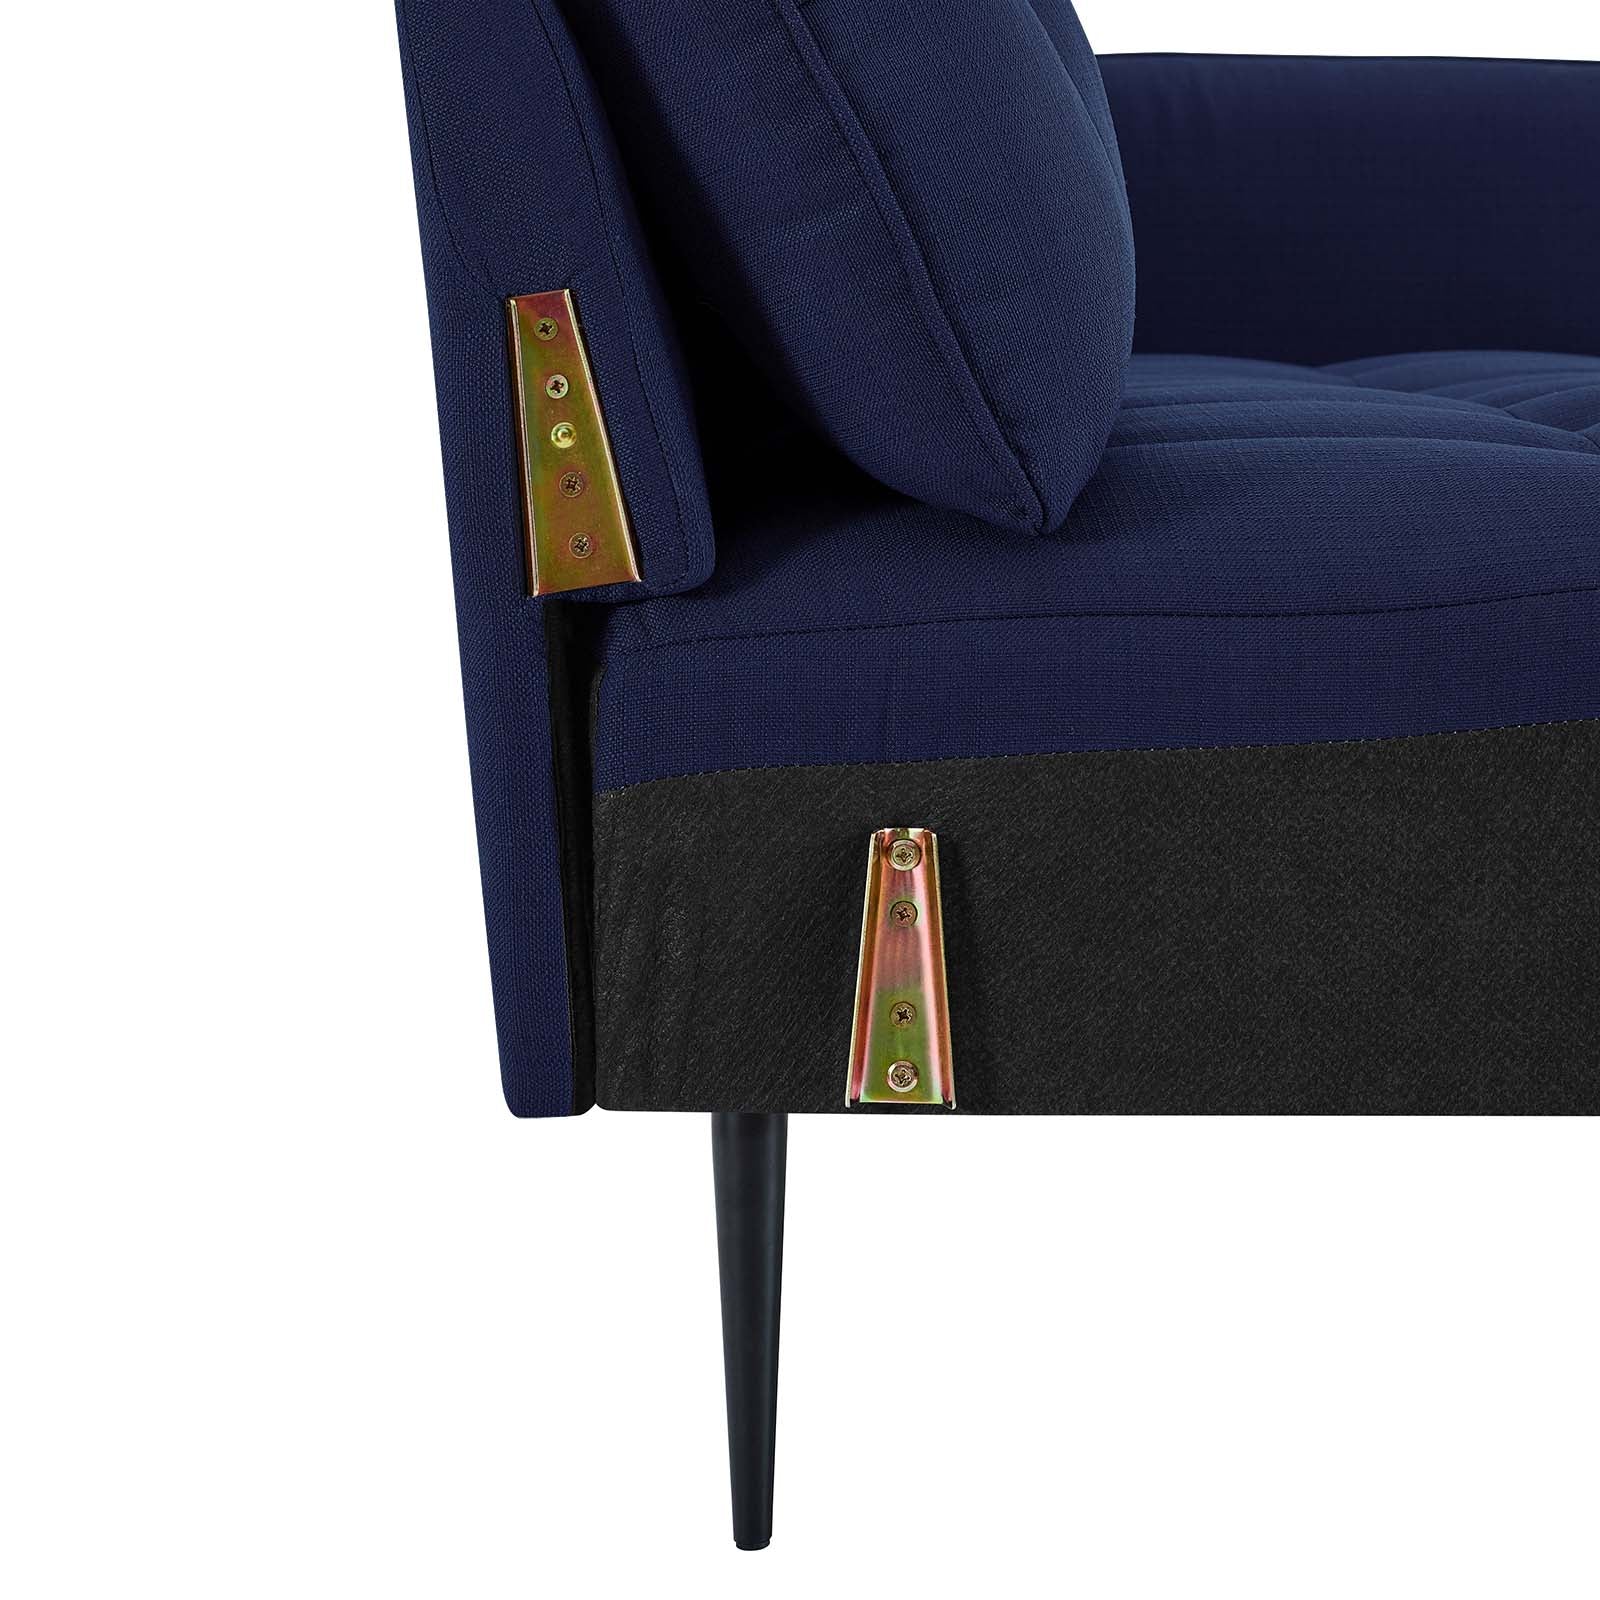 Modway Sofas & Couches - Cameron Tufted Fabric Sofa Royal Blue